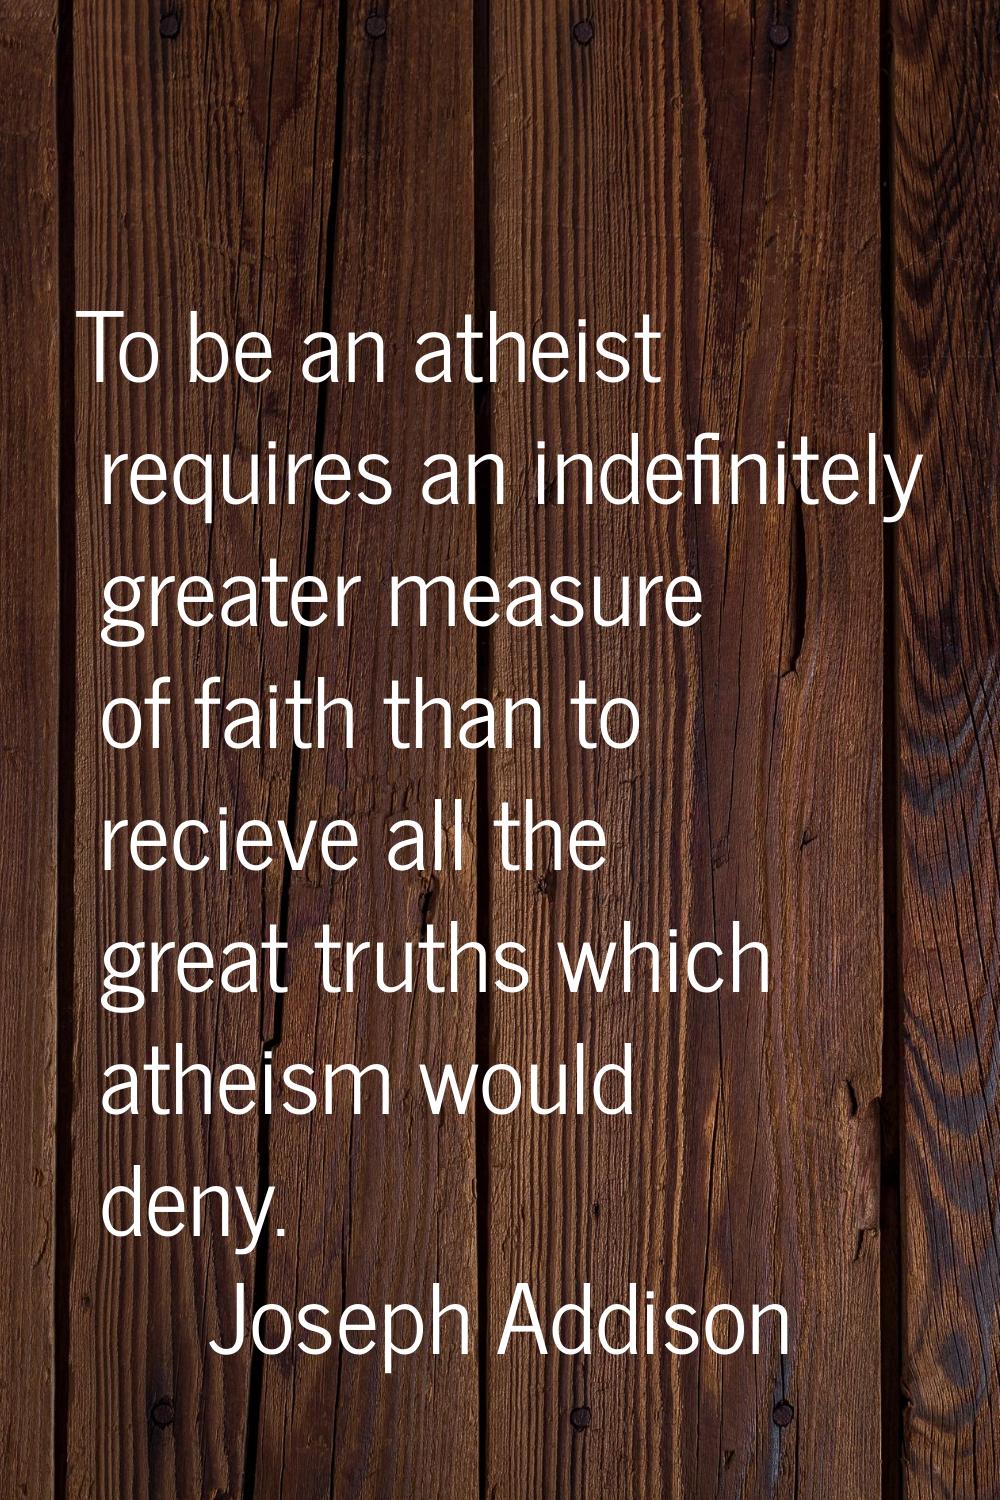 To be an atheist requires an indefinitely greater measure of faith than to recieve all the great tr